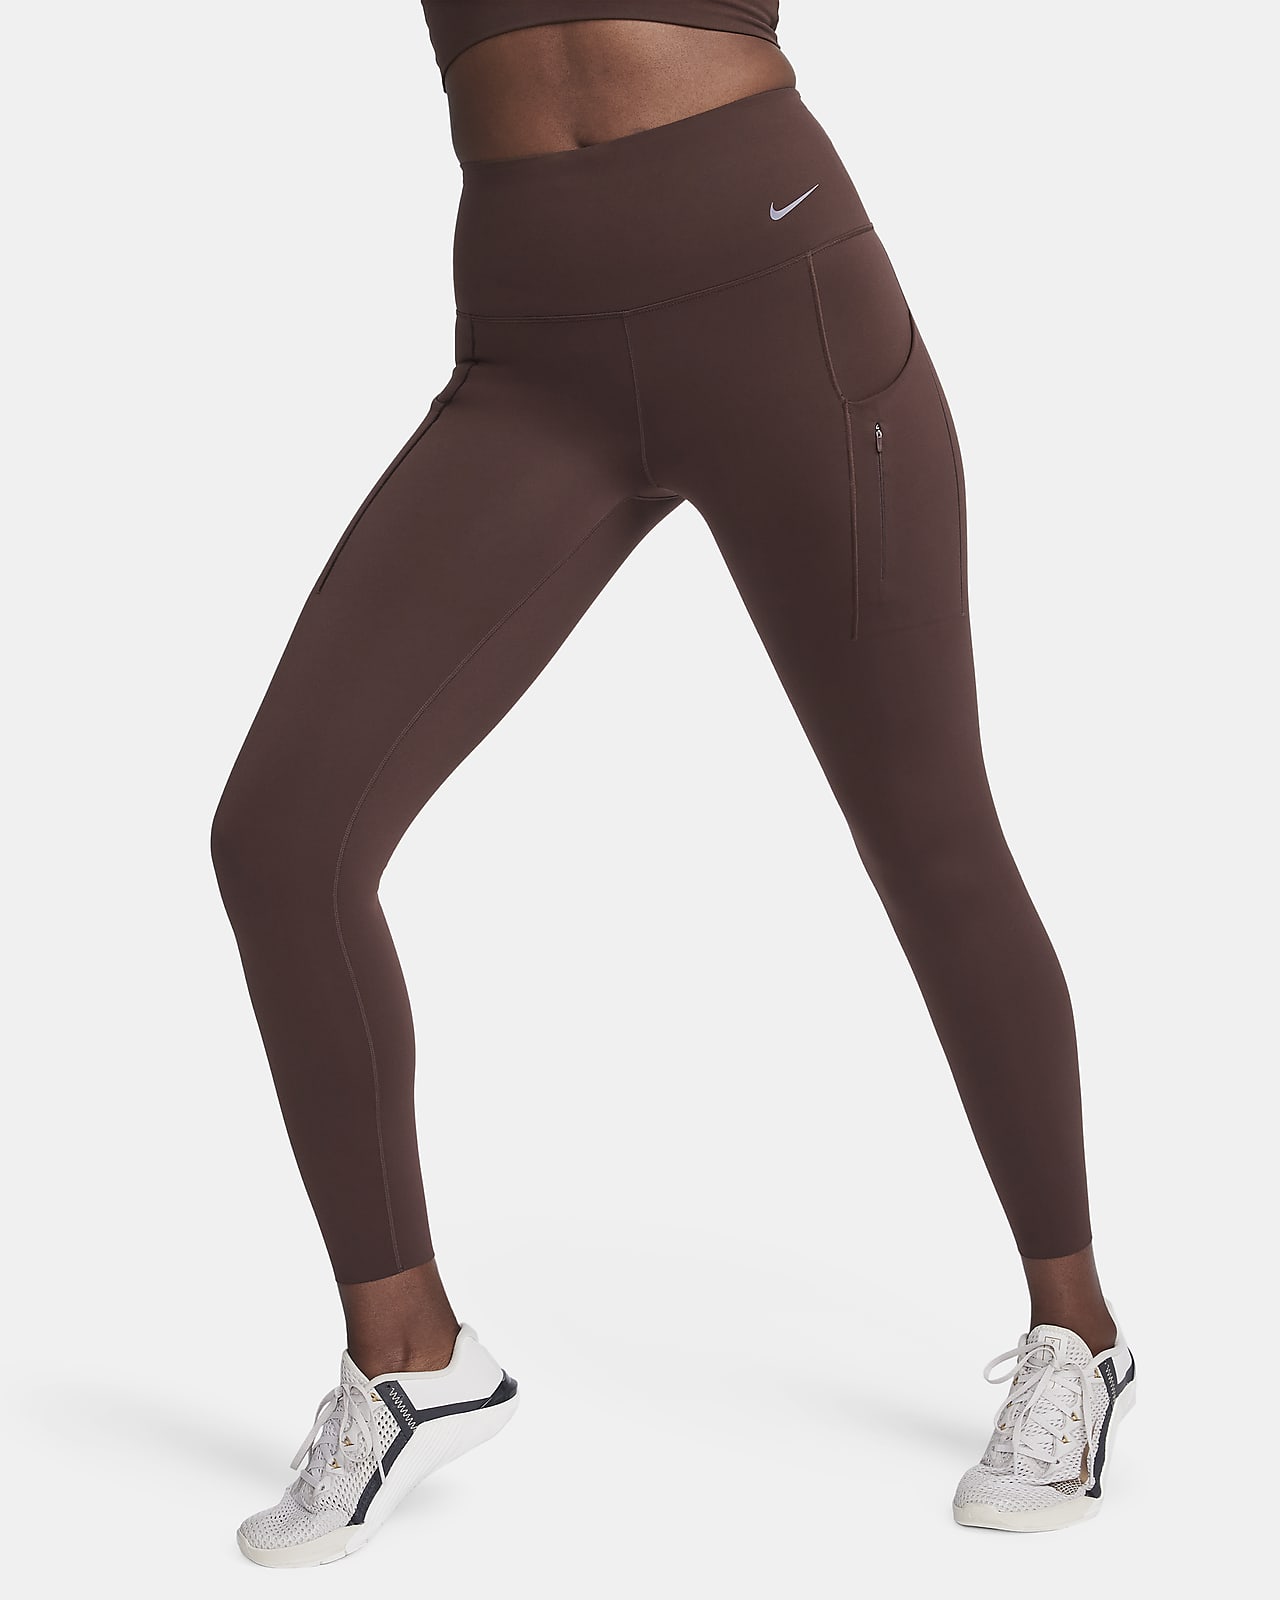 $100 - $150 Therma-FIT Unlined Tights & Leggings.